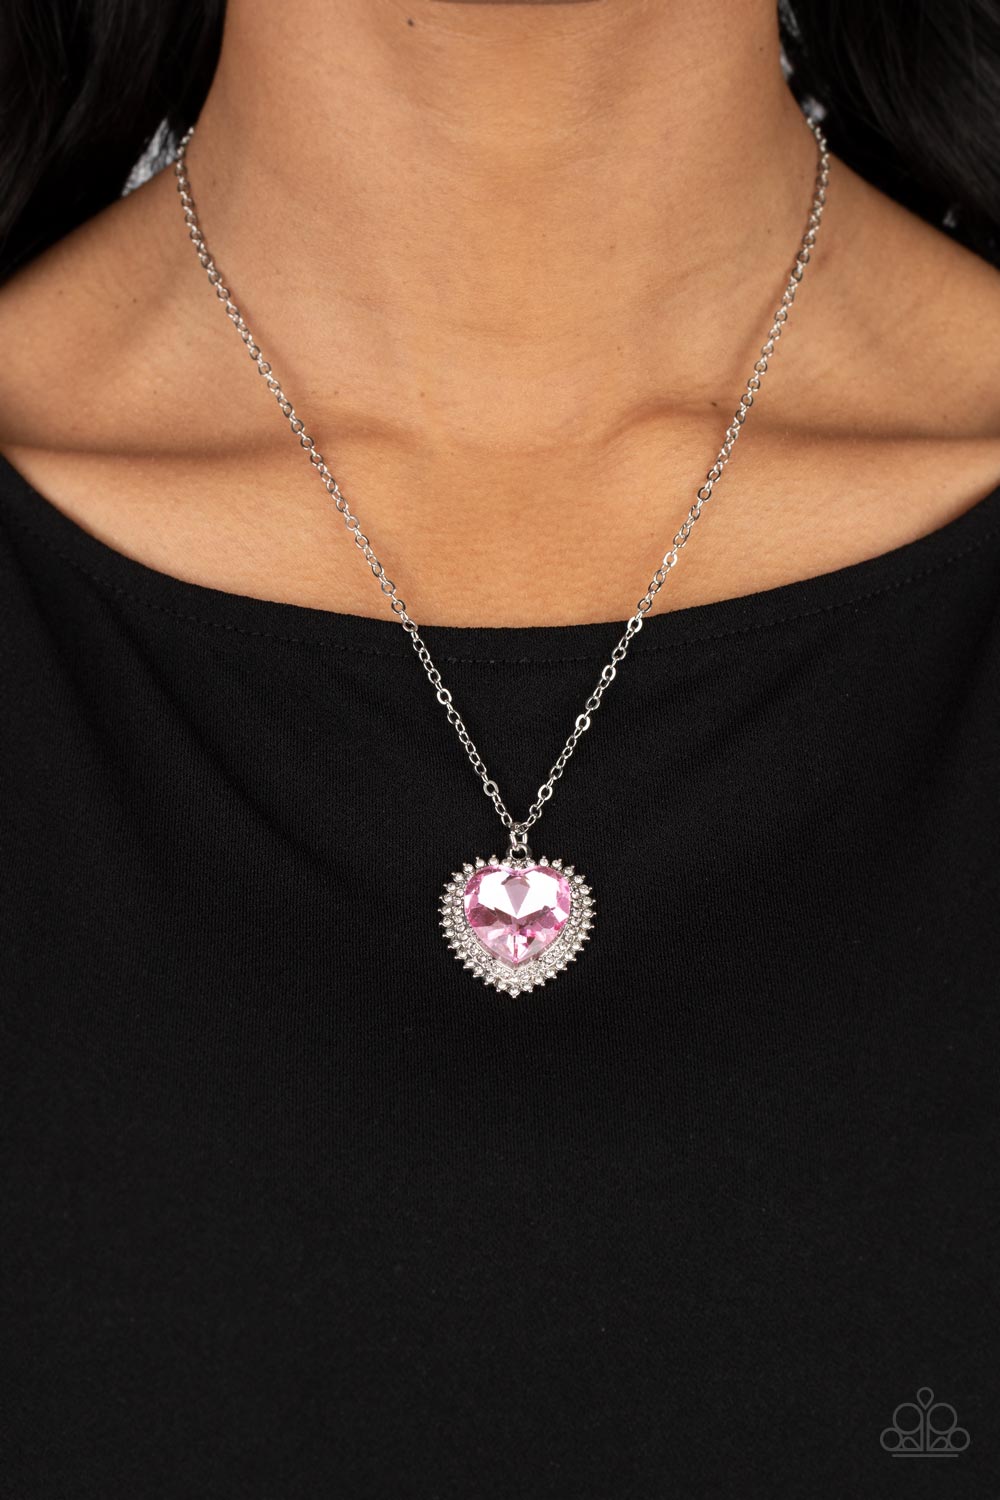 Sweethearts Stroll Pink Rhinestone Heart Necklace - Paparazzi Accessories-on model - CarasShop.com - $5 Jewelry by Cara Jewels